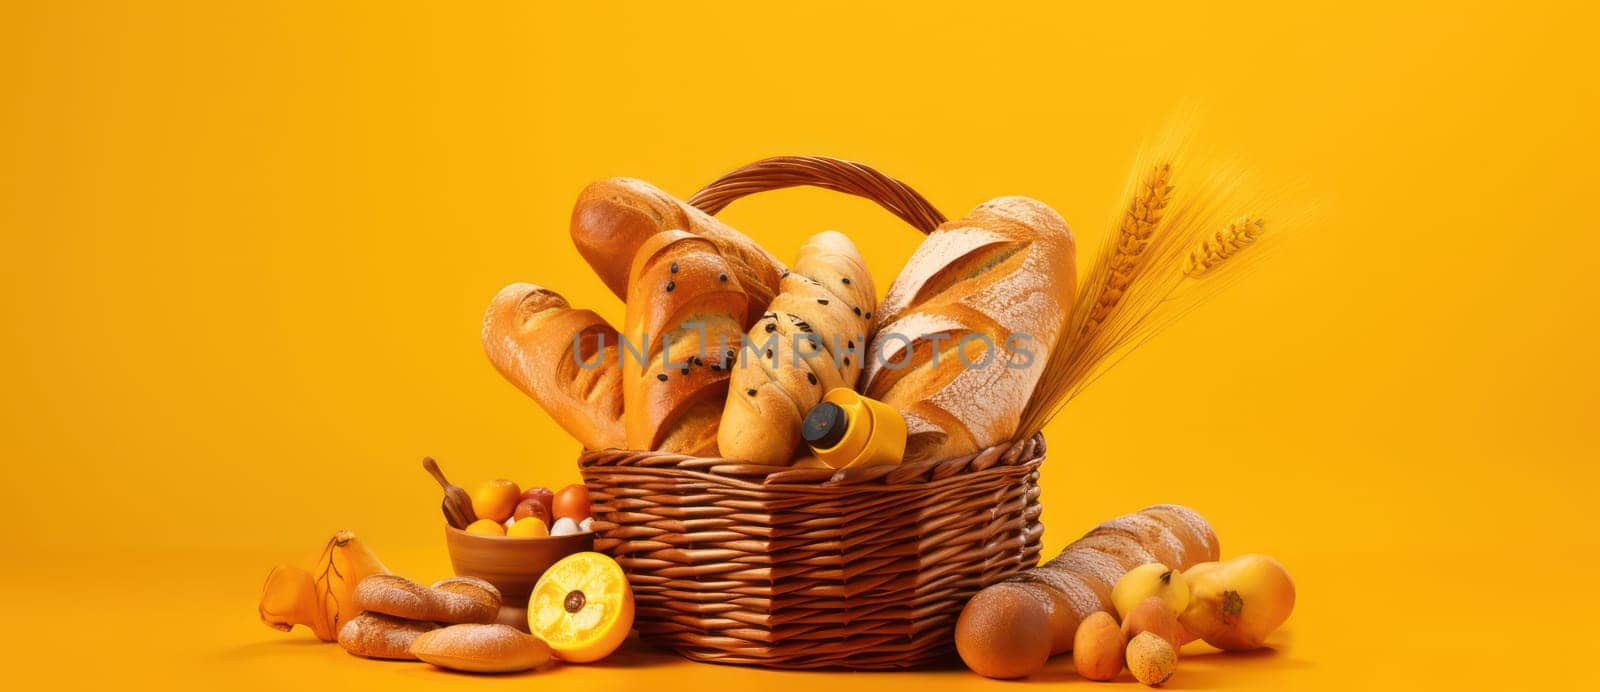 Bread Basket Bounty: Freshly Baked Traditional Organic Wheat Loaf in a Rustic Wooden Bakery Basket